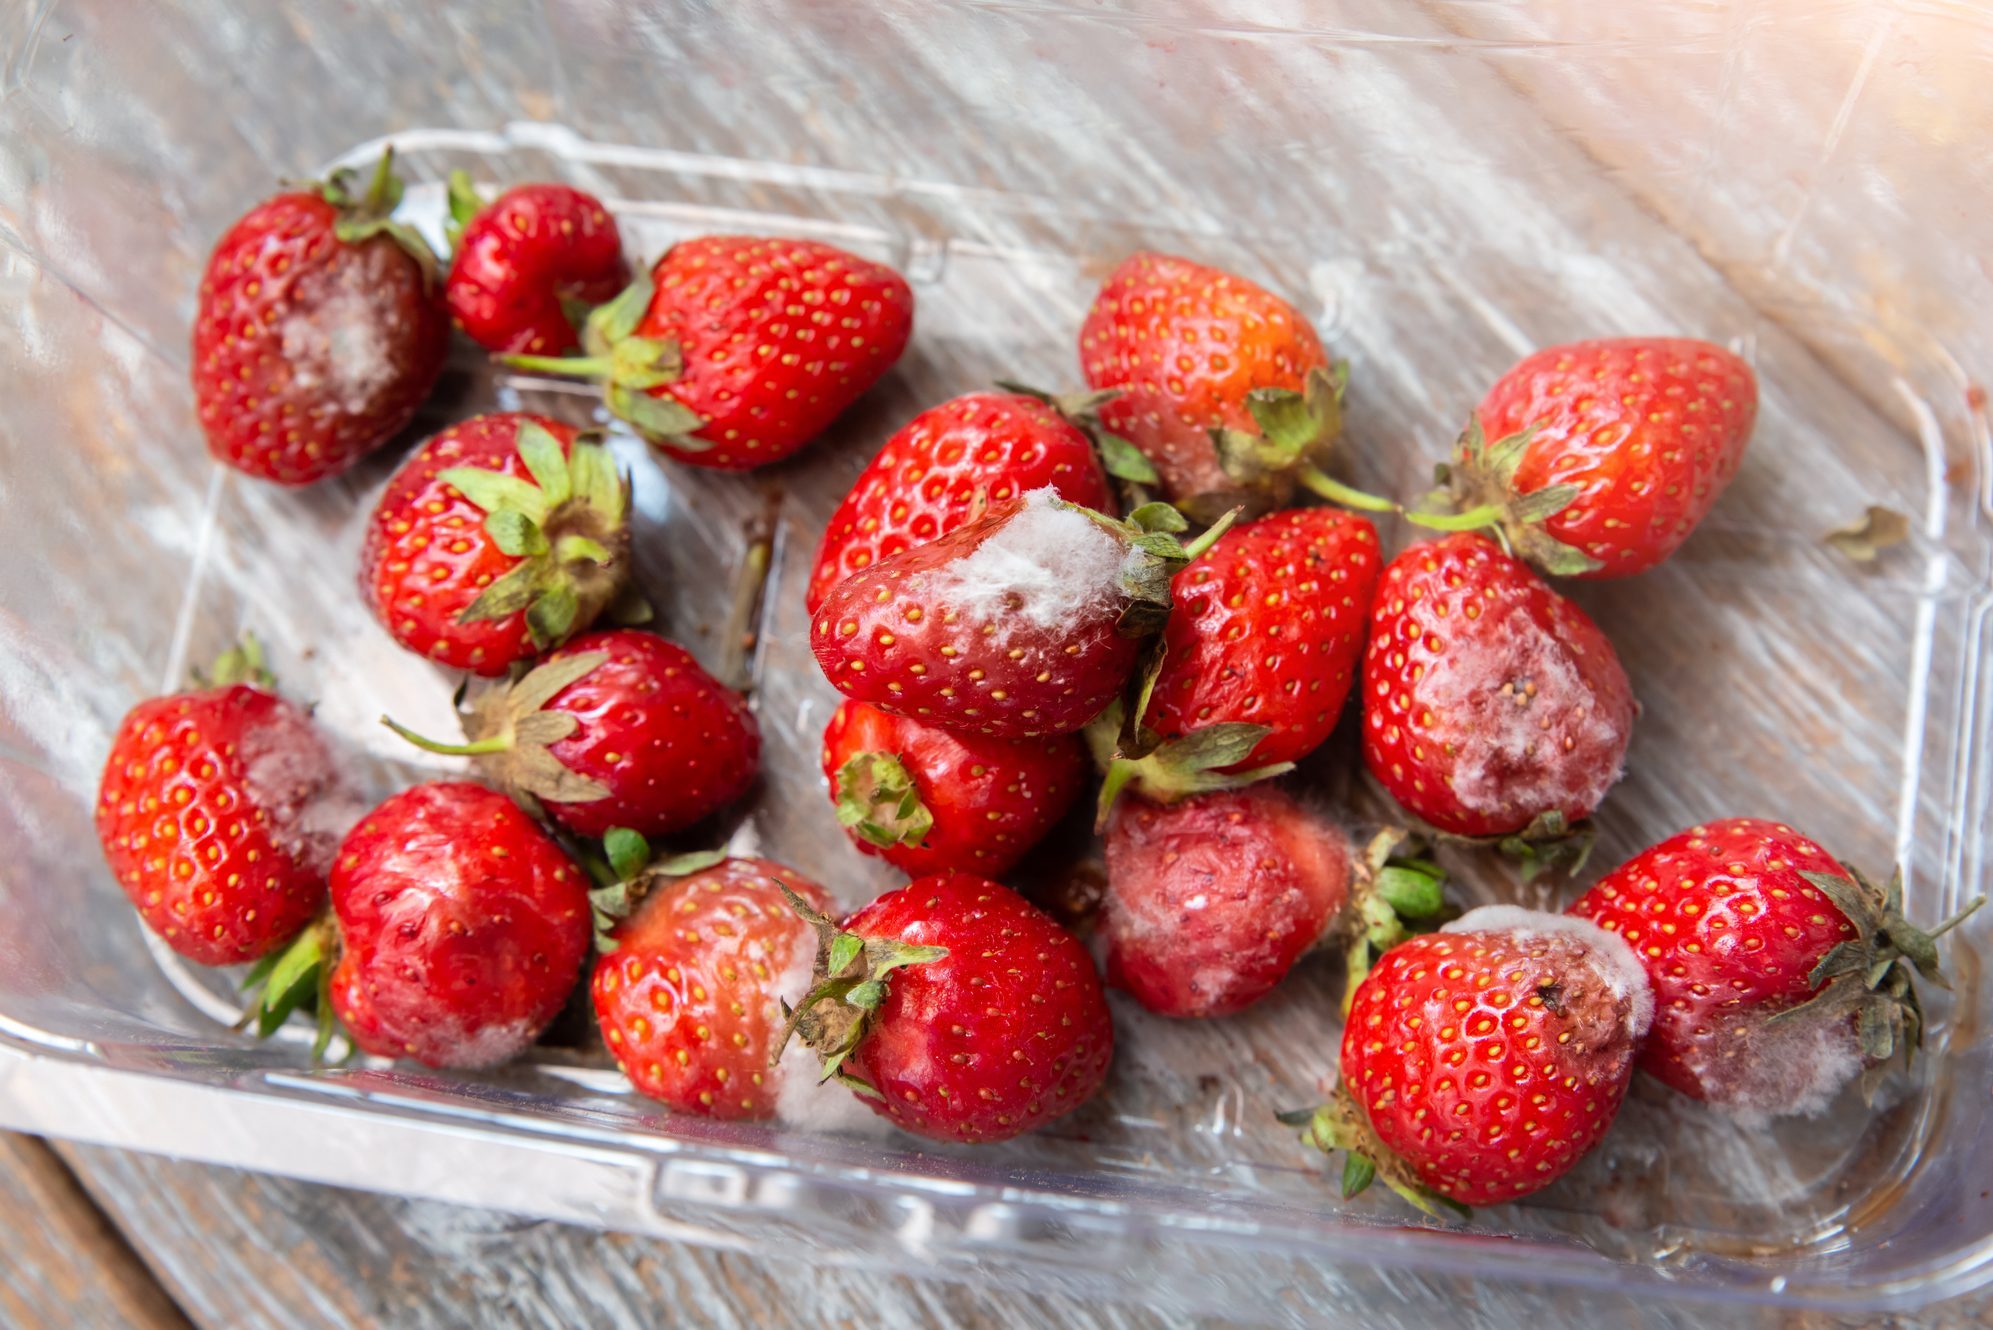 Is It Safe to Eat Strawberries If Some Have Mold?